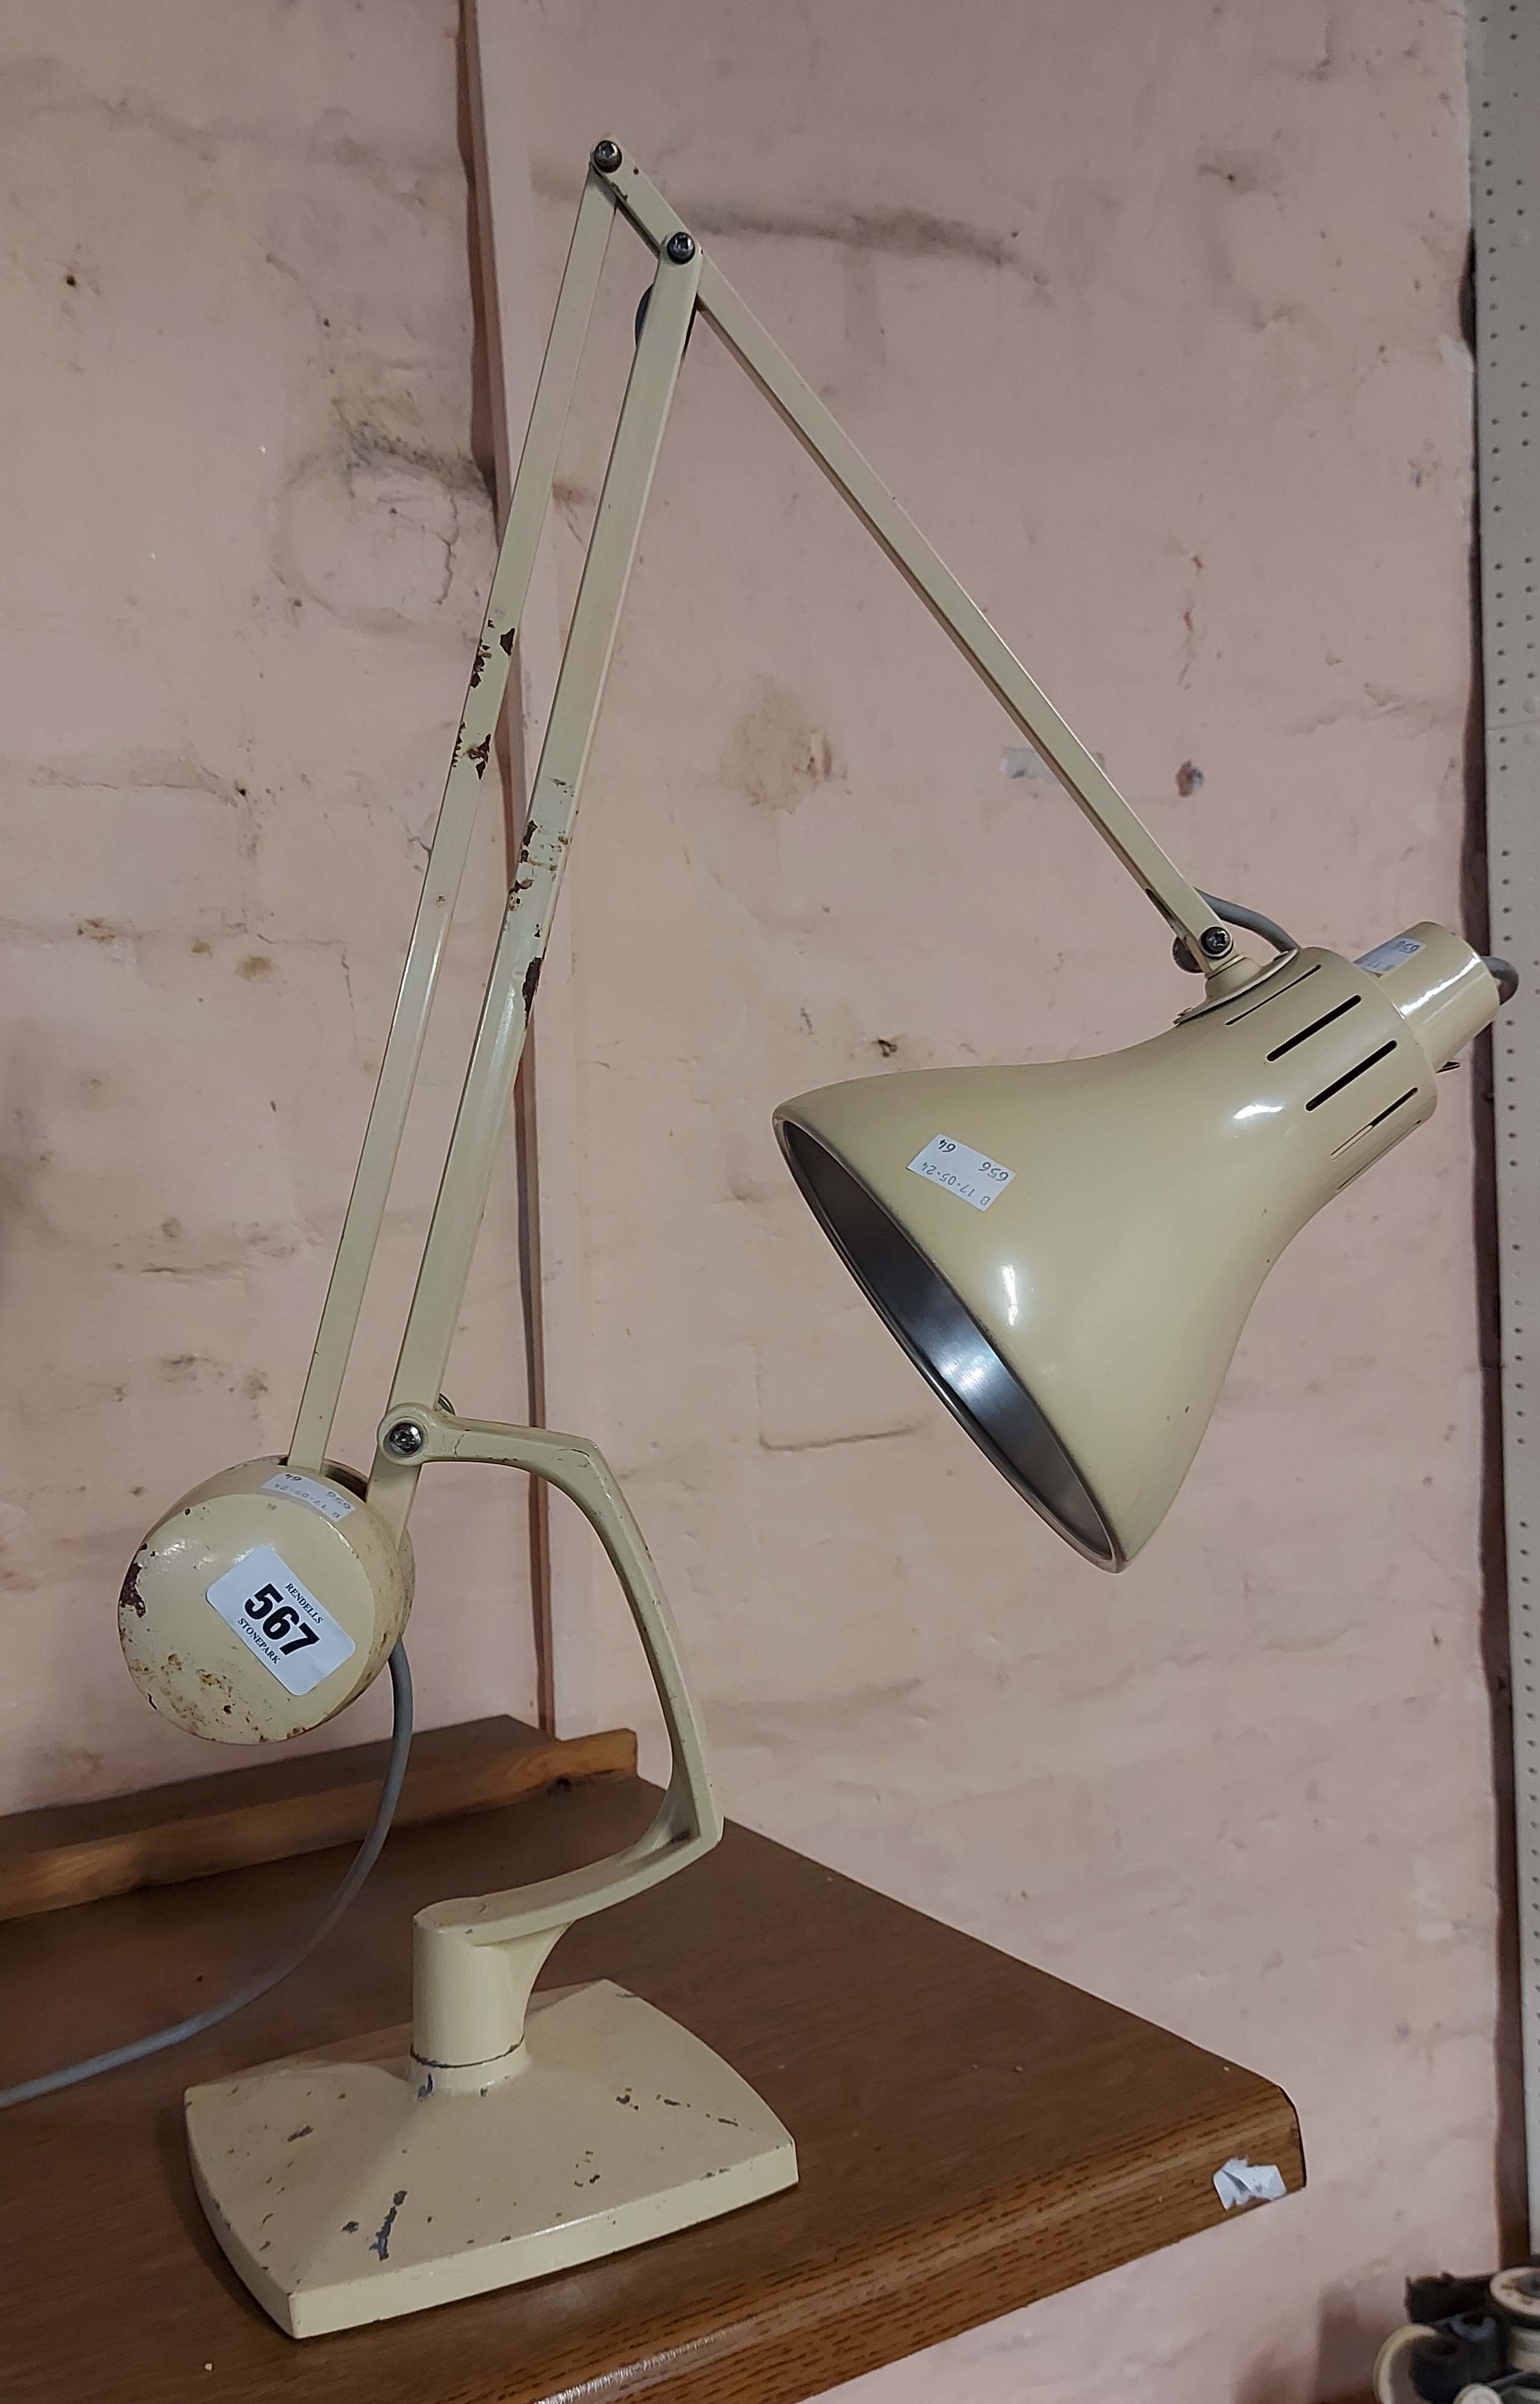 A vintage anglepoise lamp with counter balance action